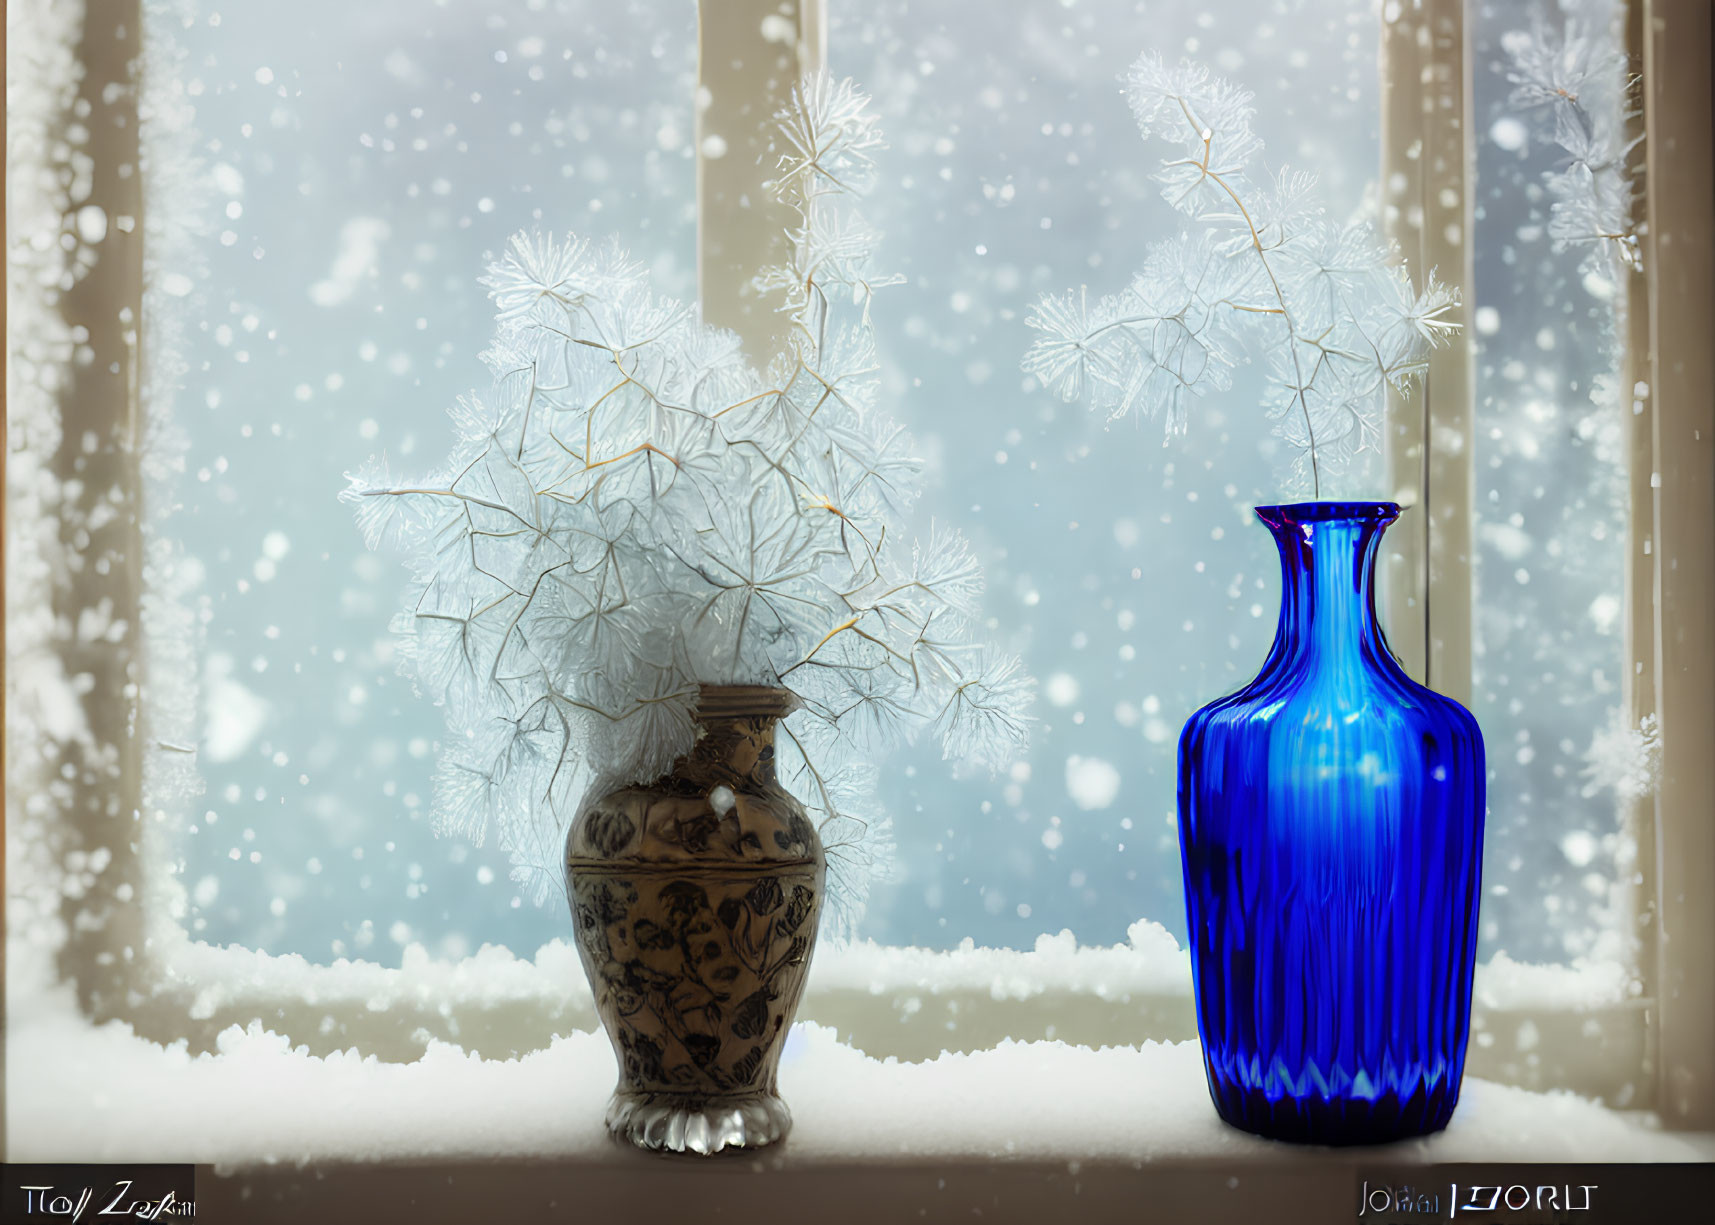 White Tree in Patterned Vase & Blue Vase on Windowsill with Snowflakes